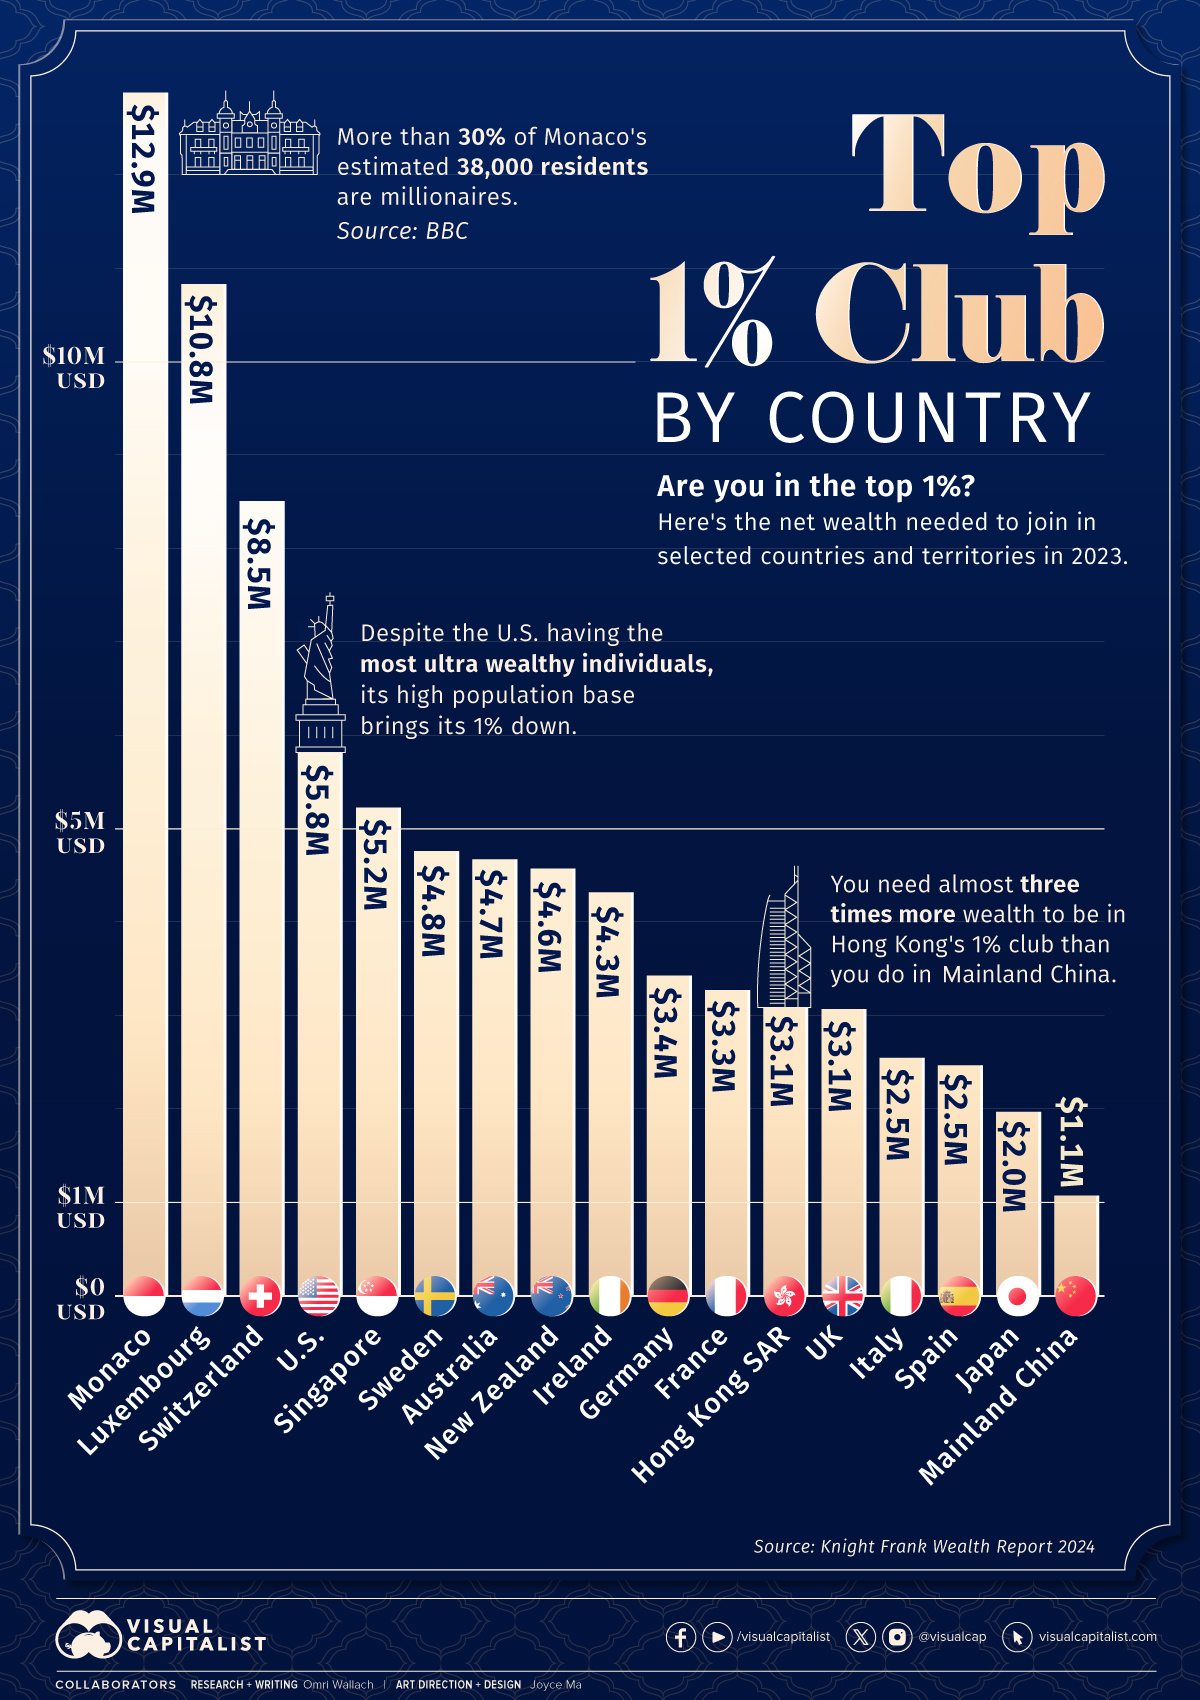 Bar chart illustrating the net wealth required to enter the 1% club in selected countries and territories.